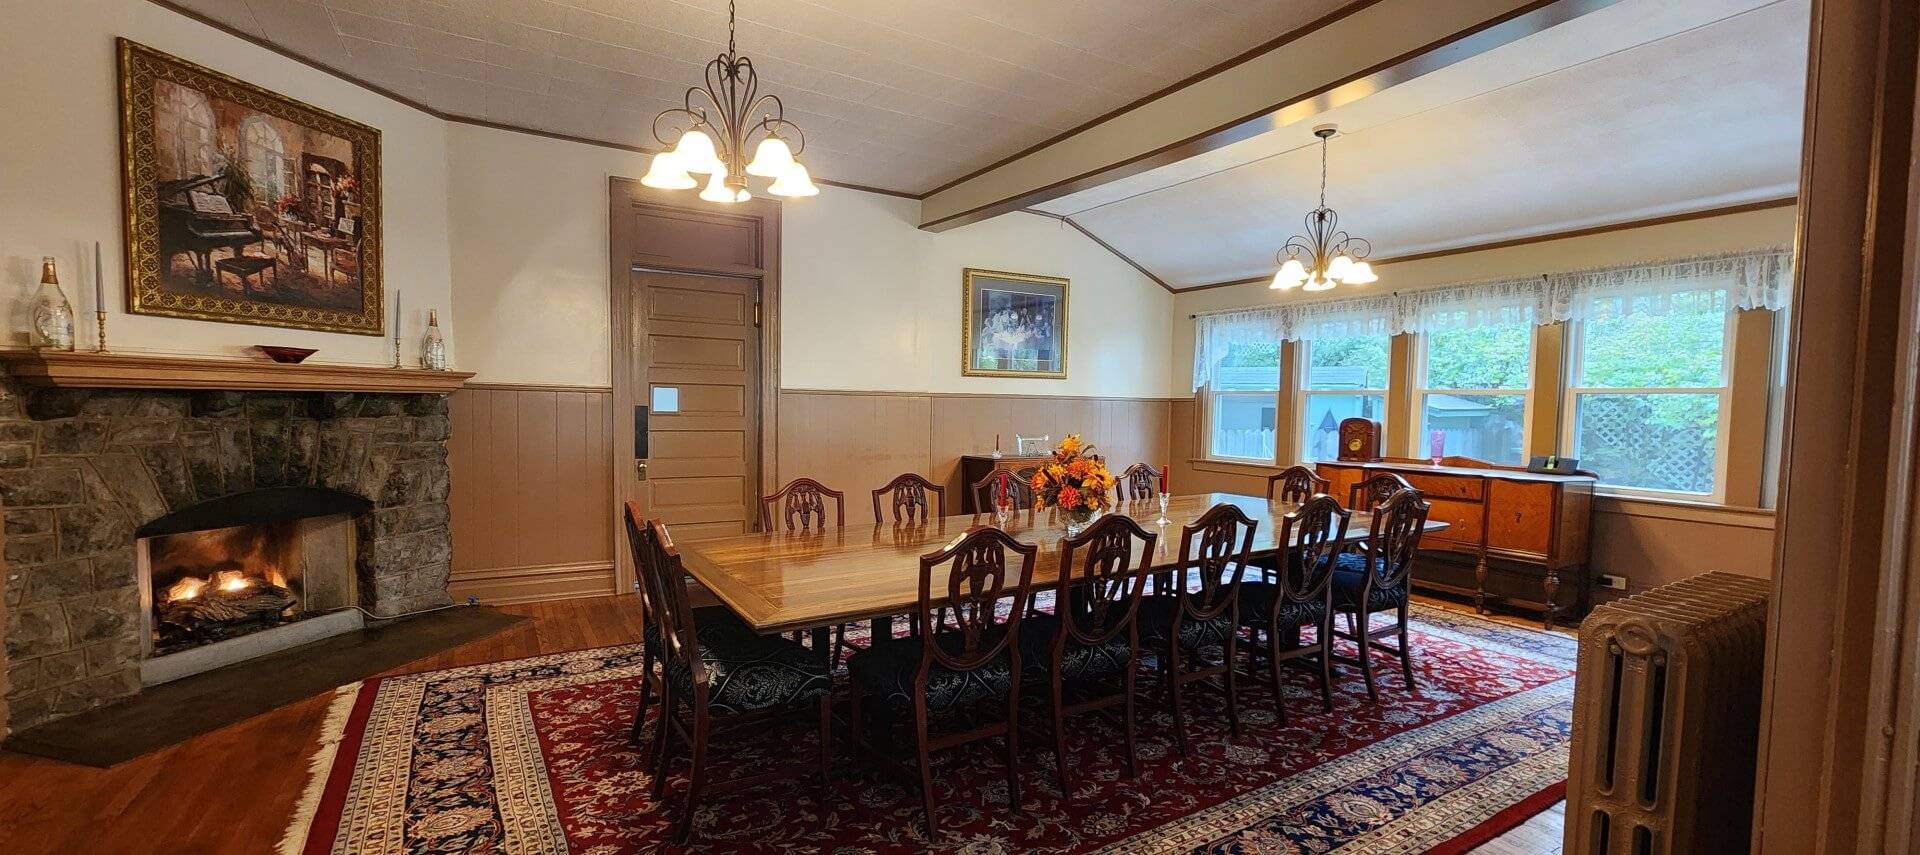 Large dining room of a home with table for twelve, wall of windows and wood burning fireplace